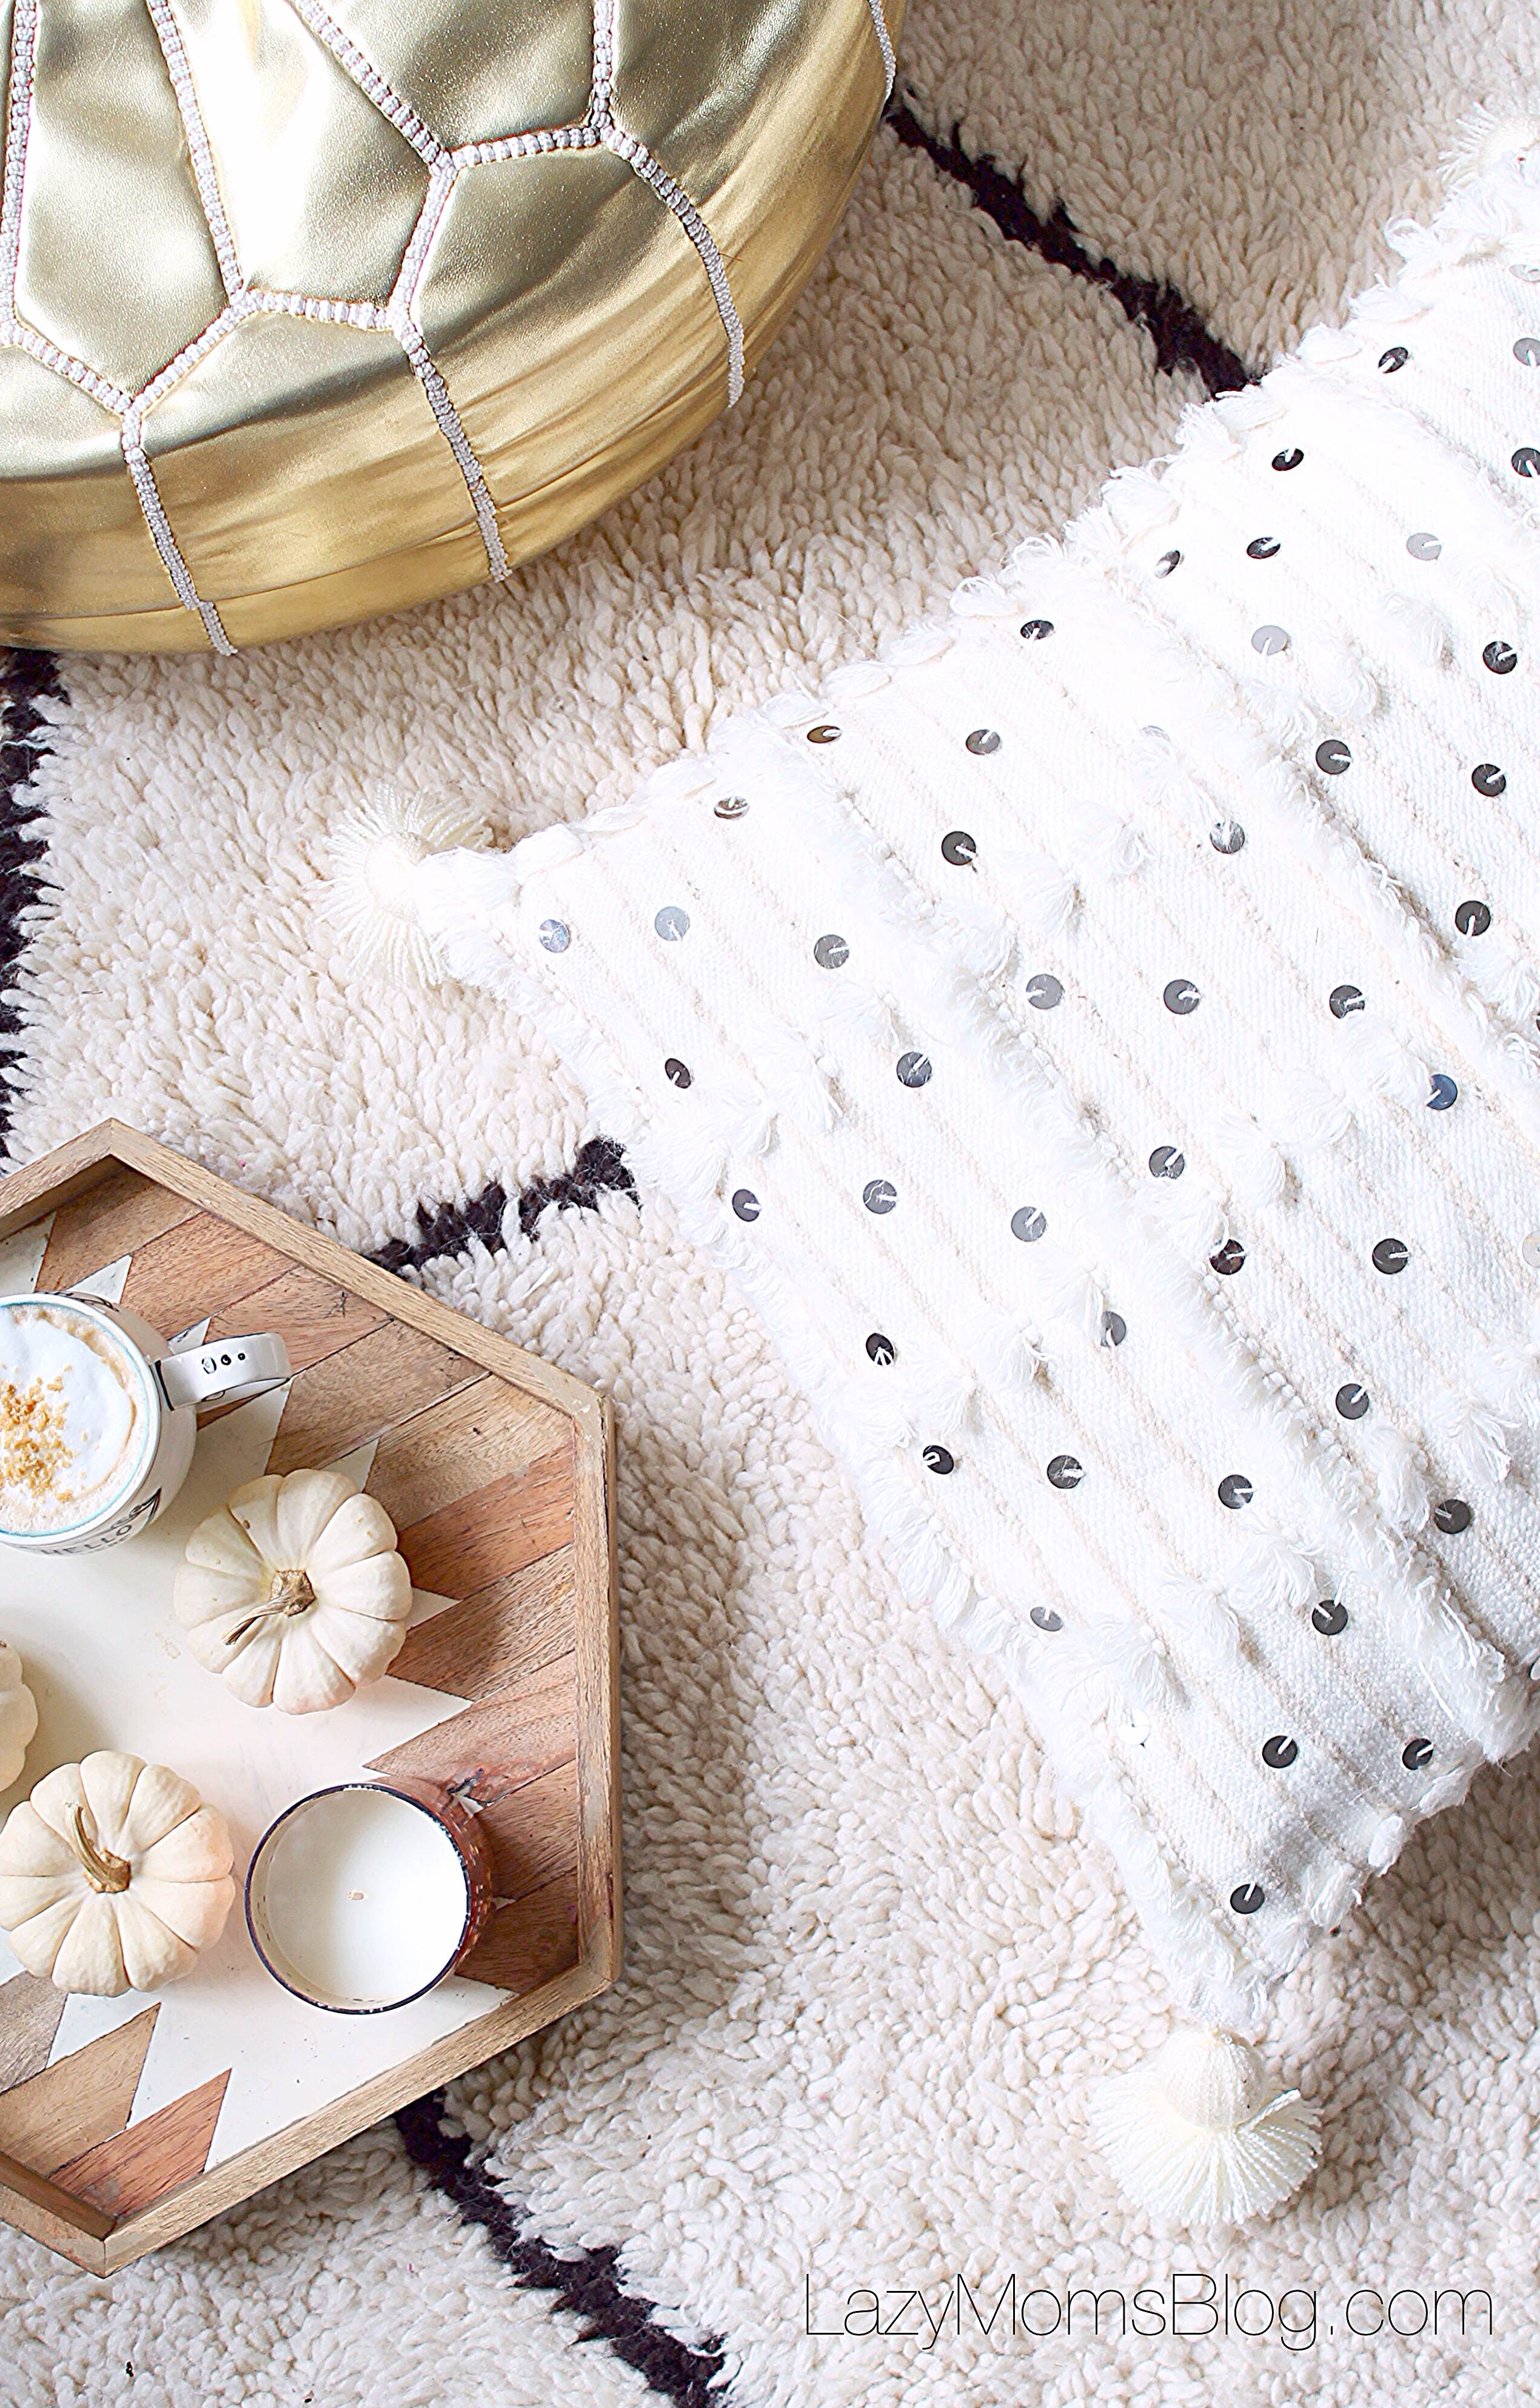 Cozy room must haves.